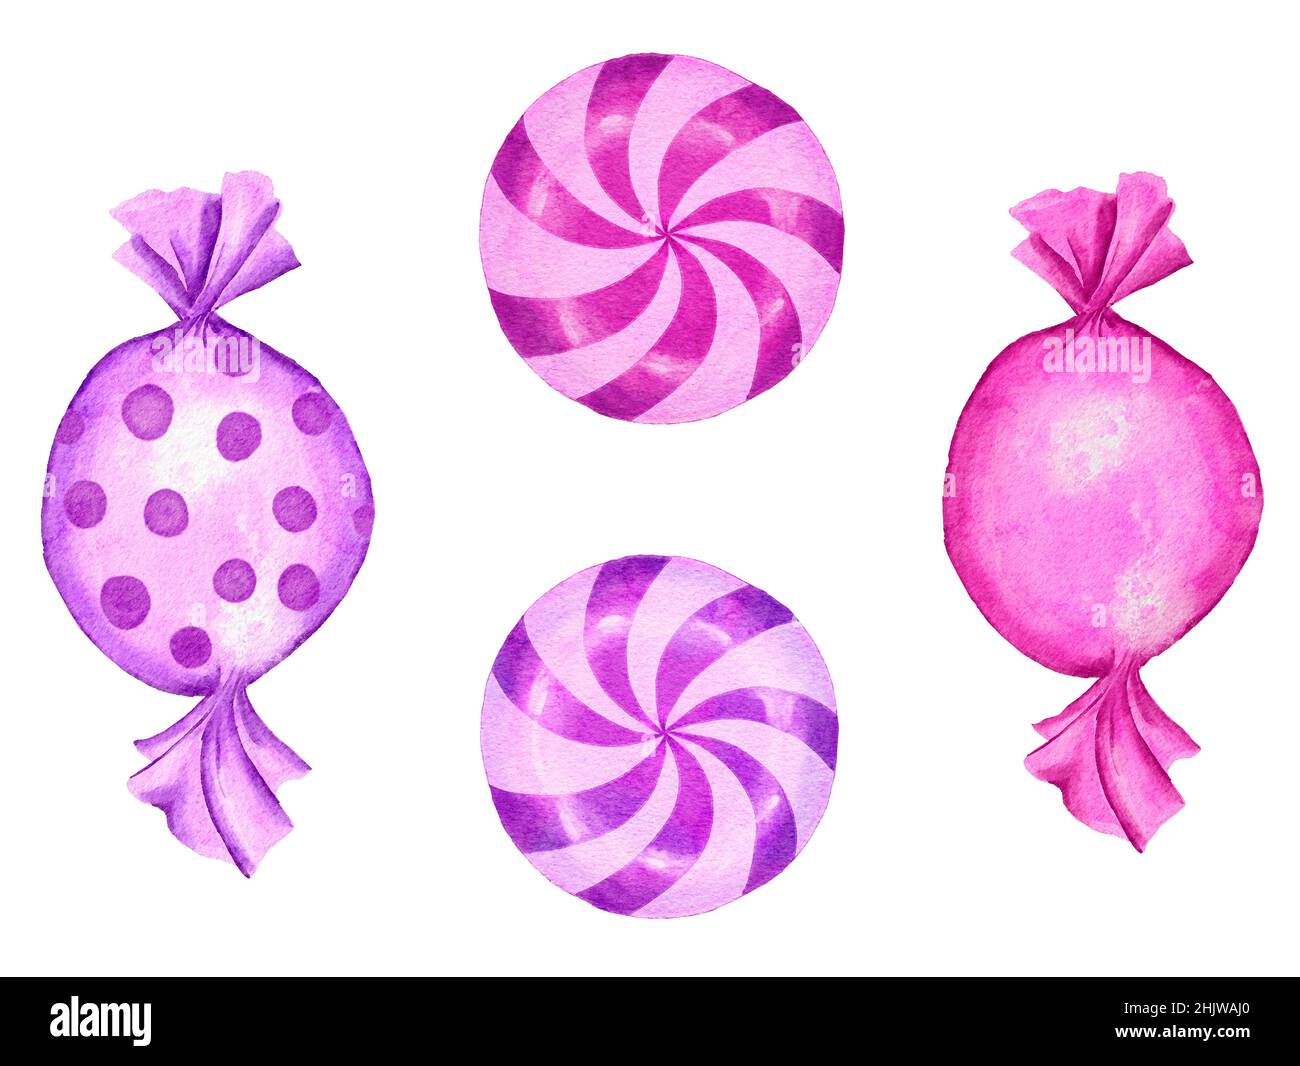 Watercolor hand drawn isolated illustration of pink purple candy, pastel candies sweets dessert. Bright party food, elements for birthday baby shower decor. Swirl lollipop hard sugar bonbon in polka dot Stock Photo